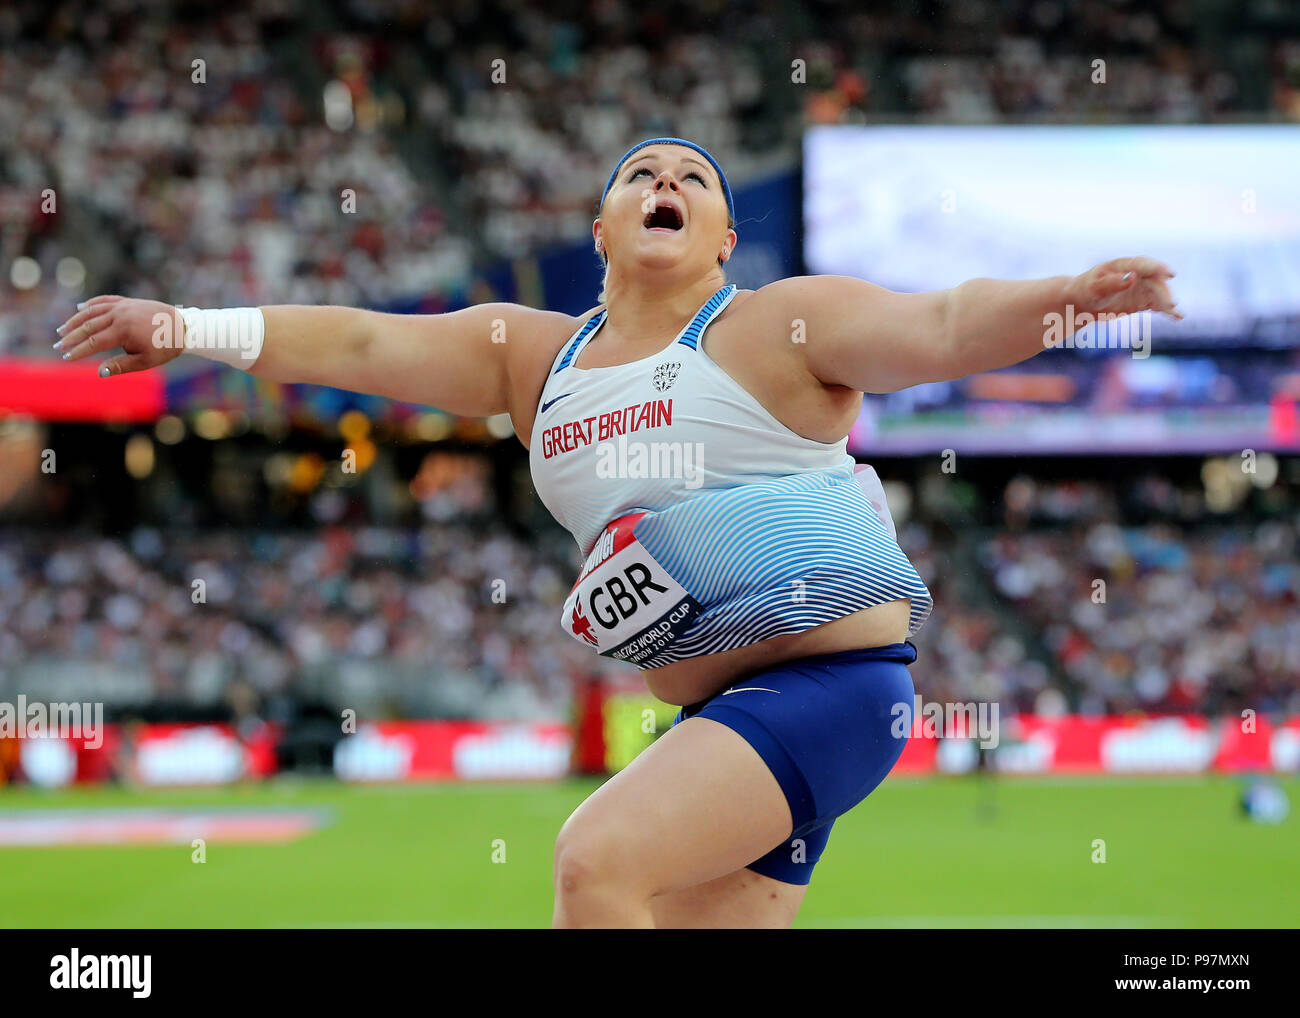 Great Britains Amelia Strickler Competes In The Womens Shot Put During